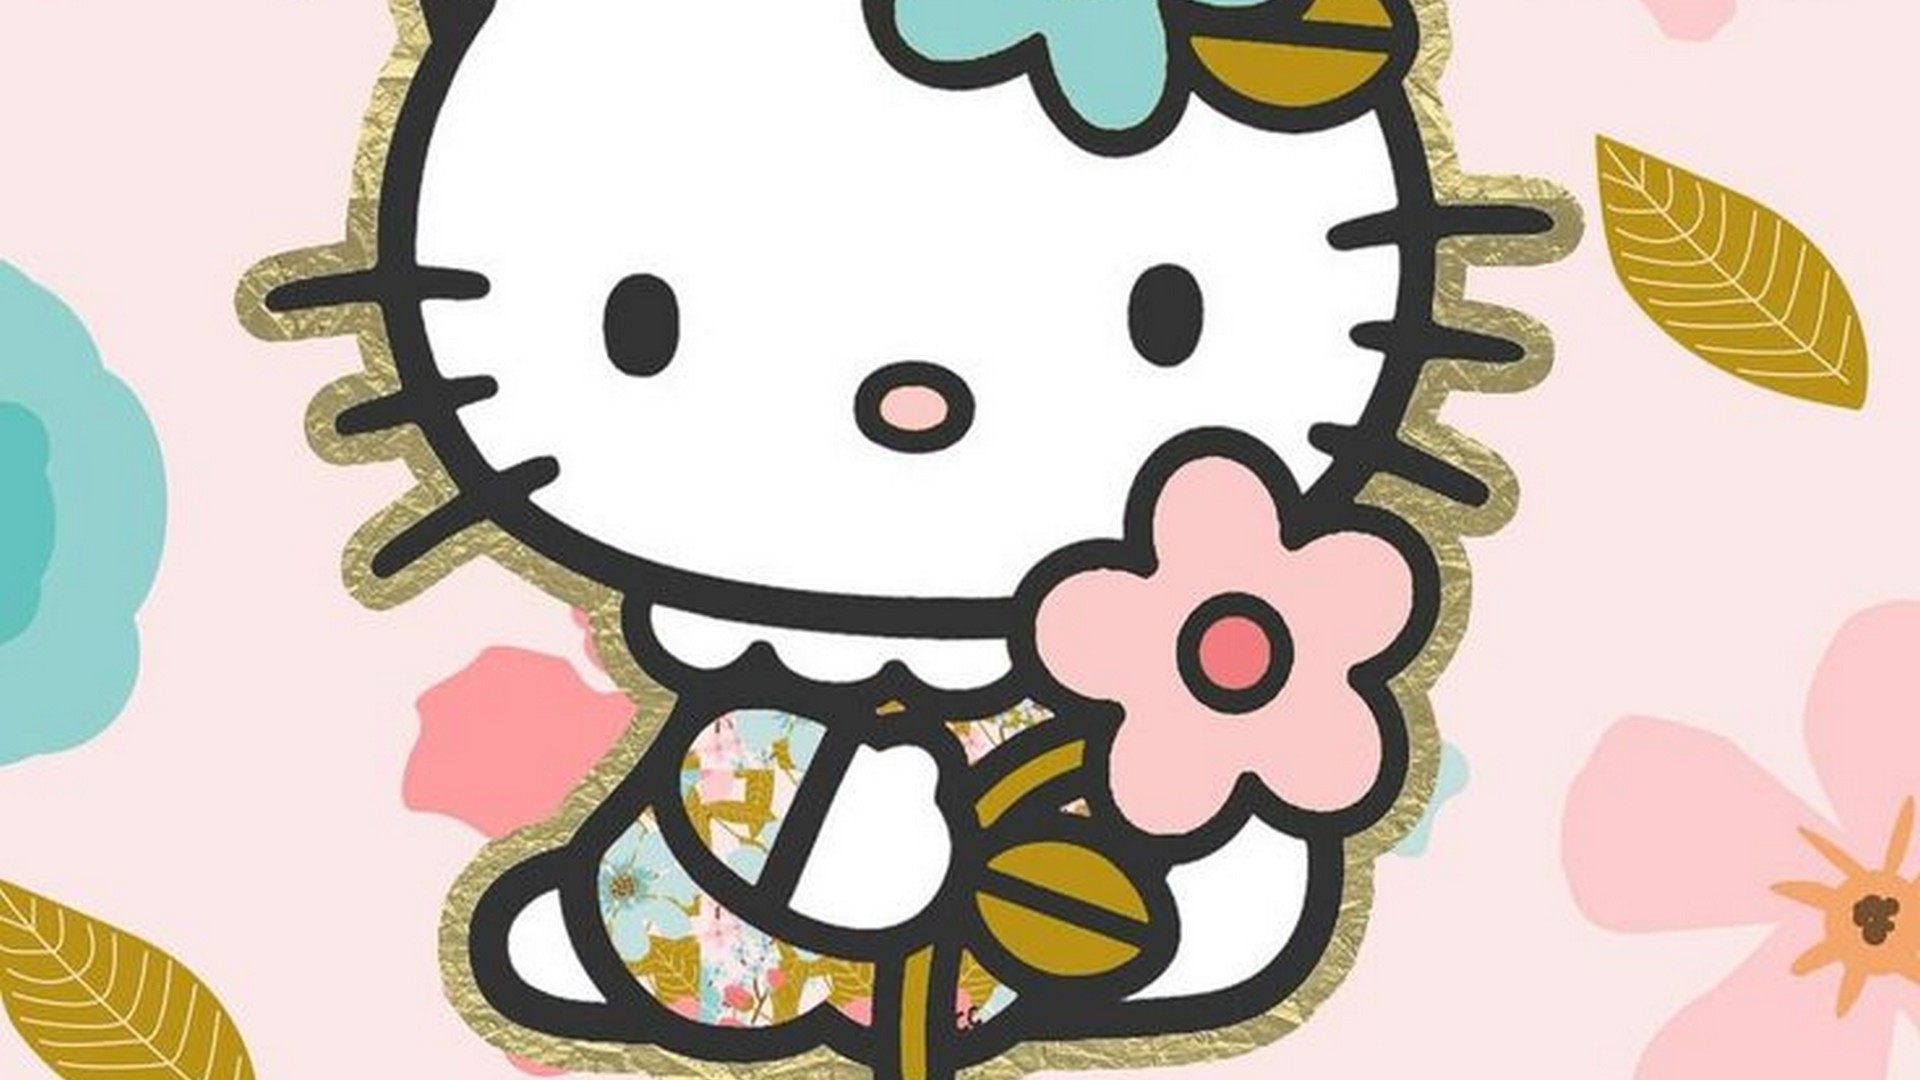 Hello Kitty Wallpaper HD with image resolution 1920x1080 pixel. You can make this wallpaper for your Desktop Computer Backgrounds, Mac Wallpapers, Android Lock screen or iPhone Screensavers